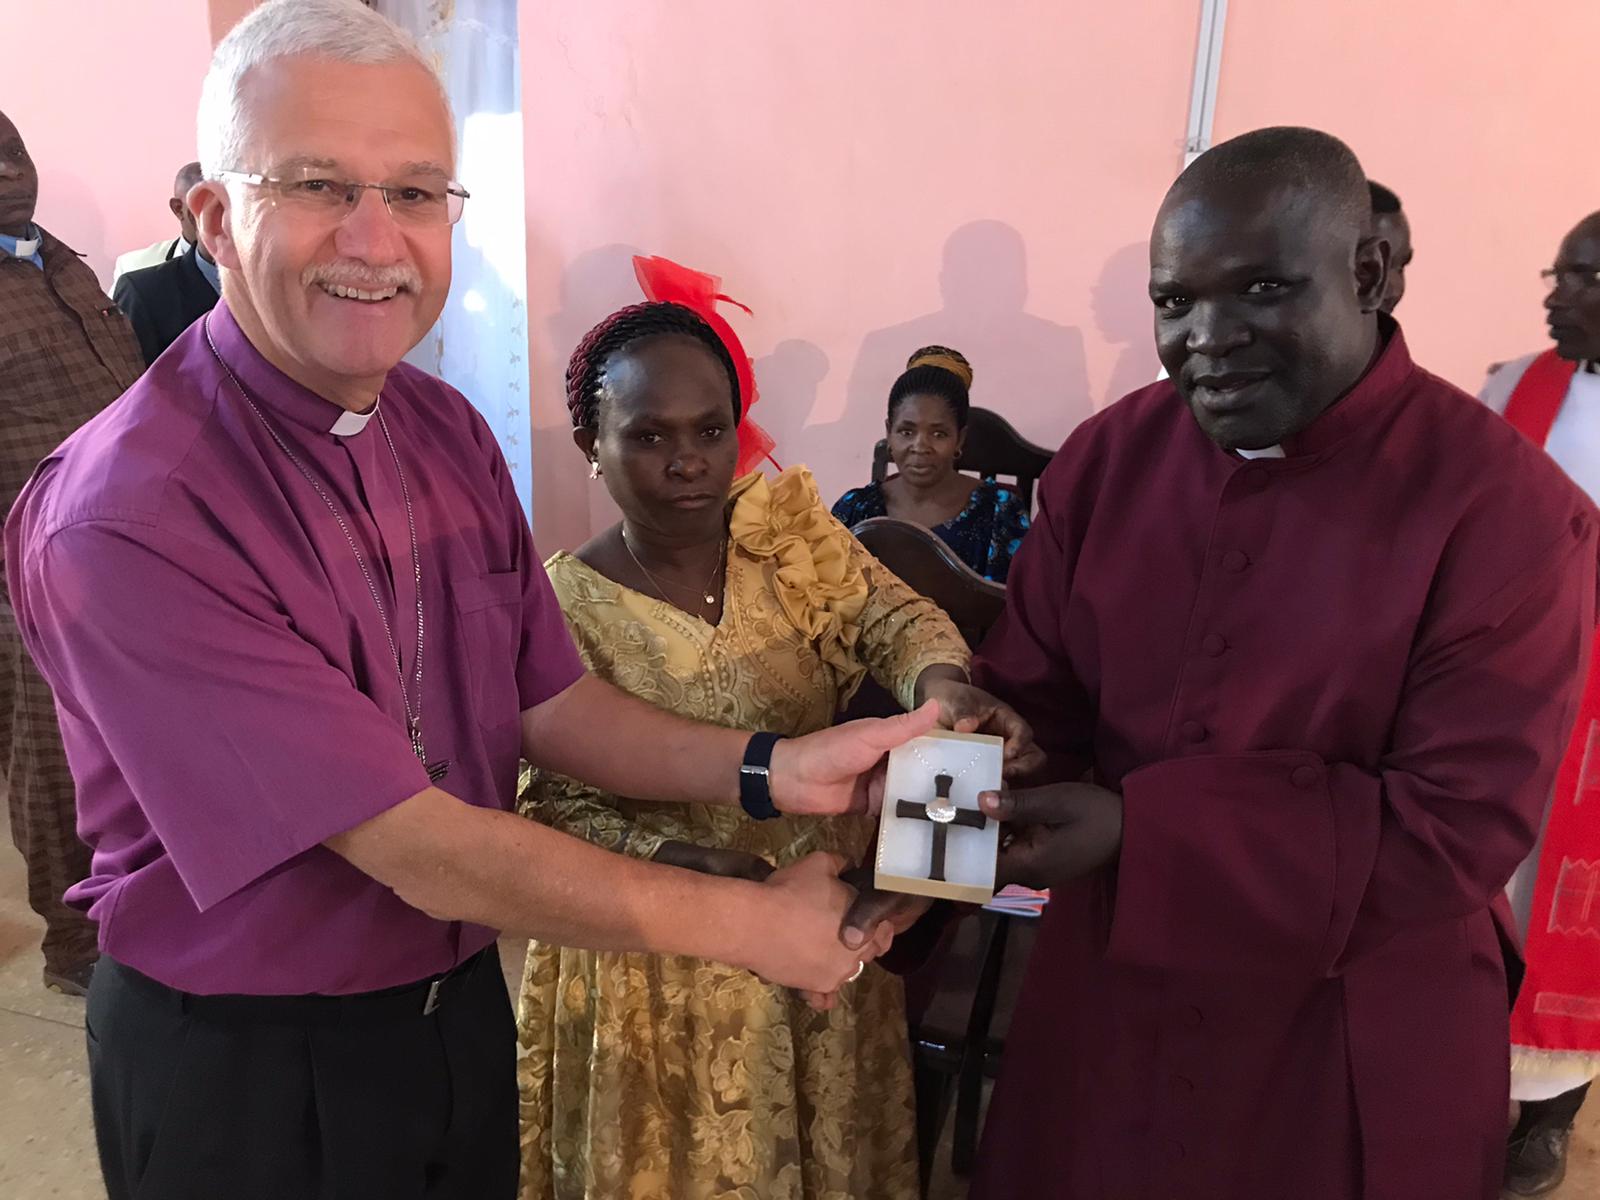 Bishop Jonathan presents Bishop Luzineth and his wife with the gift of a cross at the new Bishop's consecration